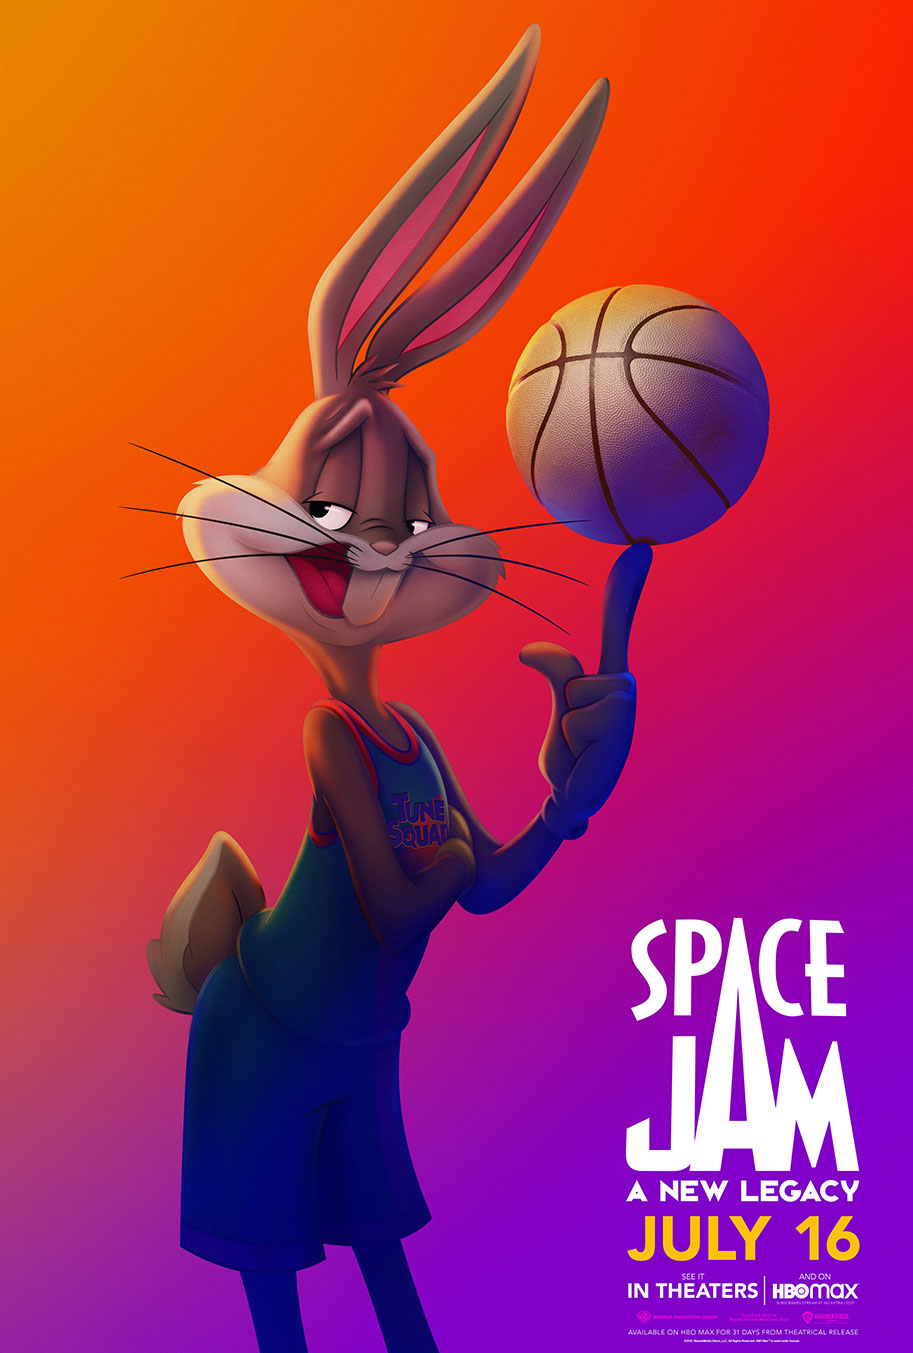 Space Jam: A New Legacy, Looney Tunes, LeBron James